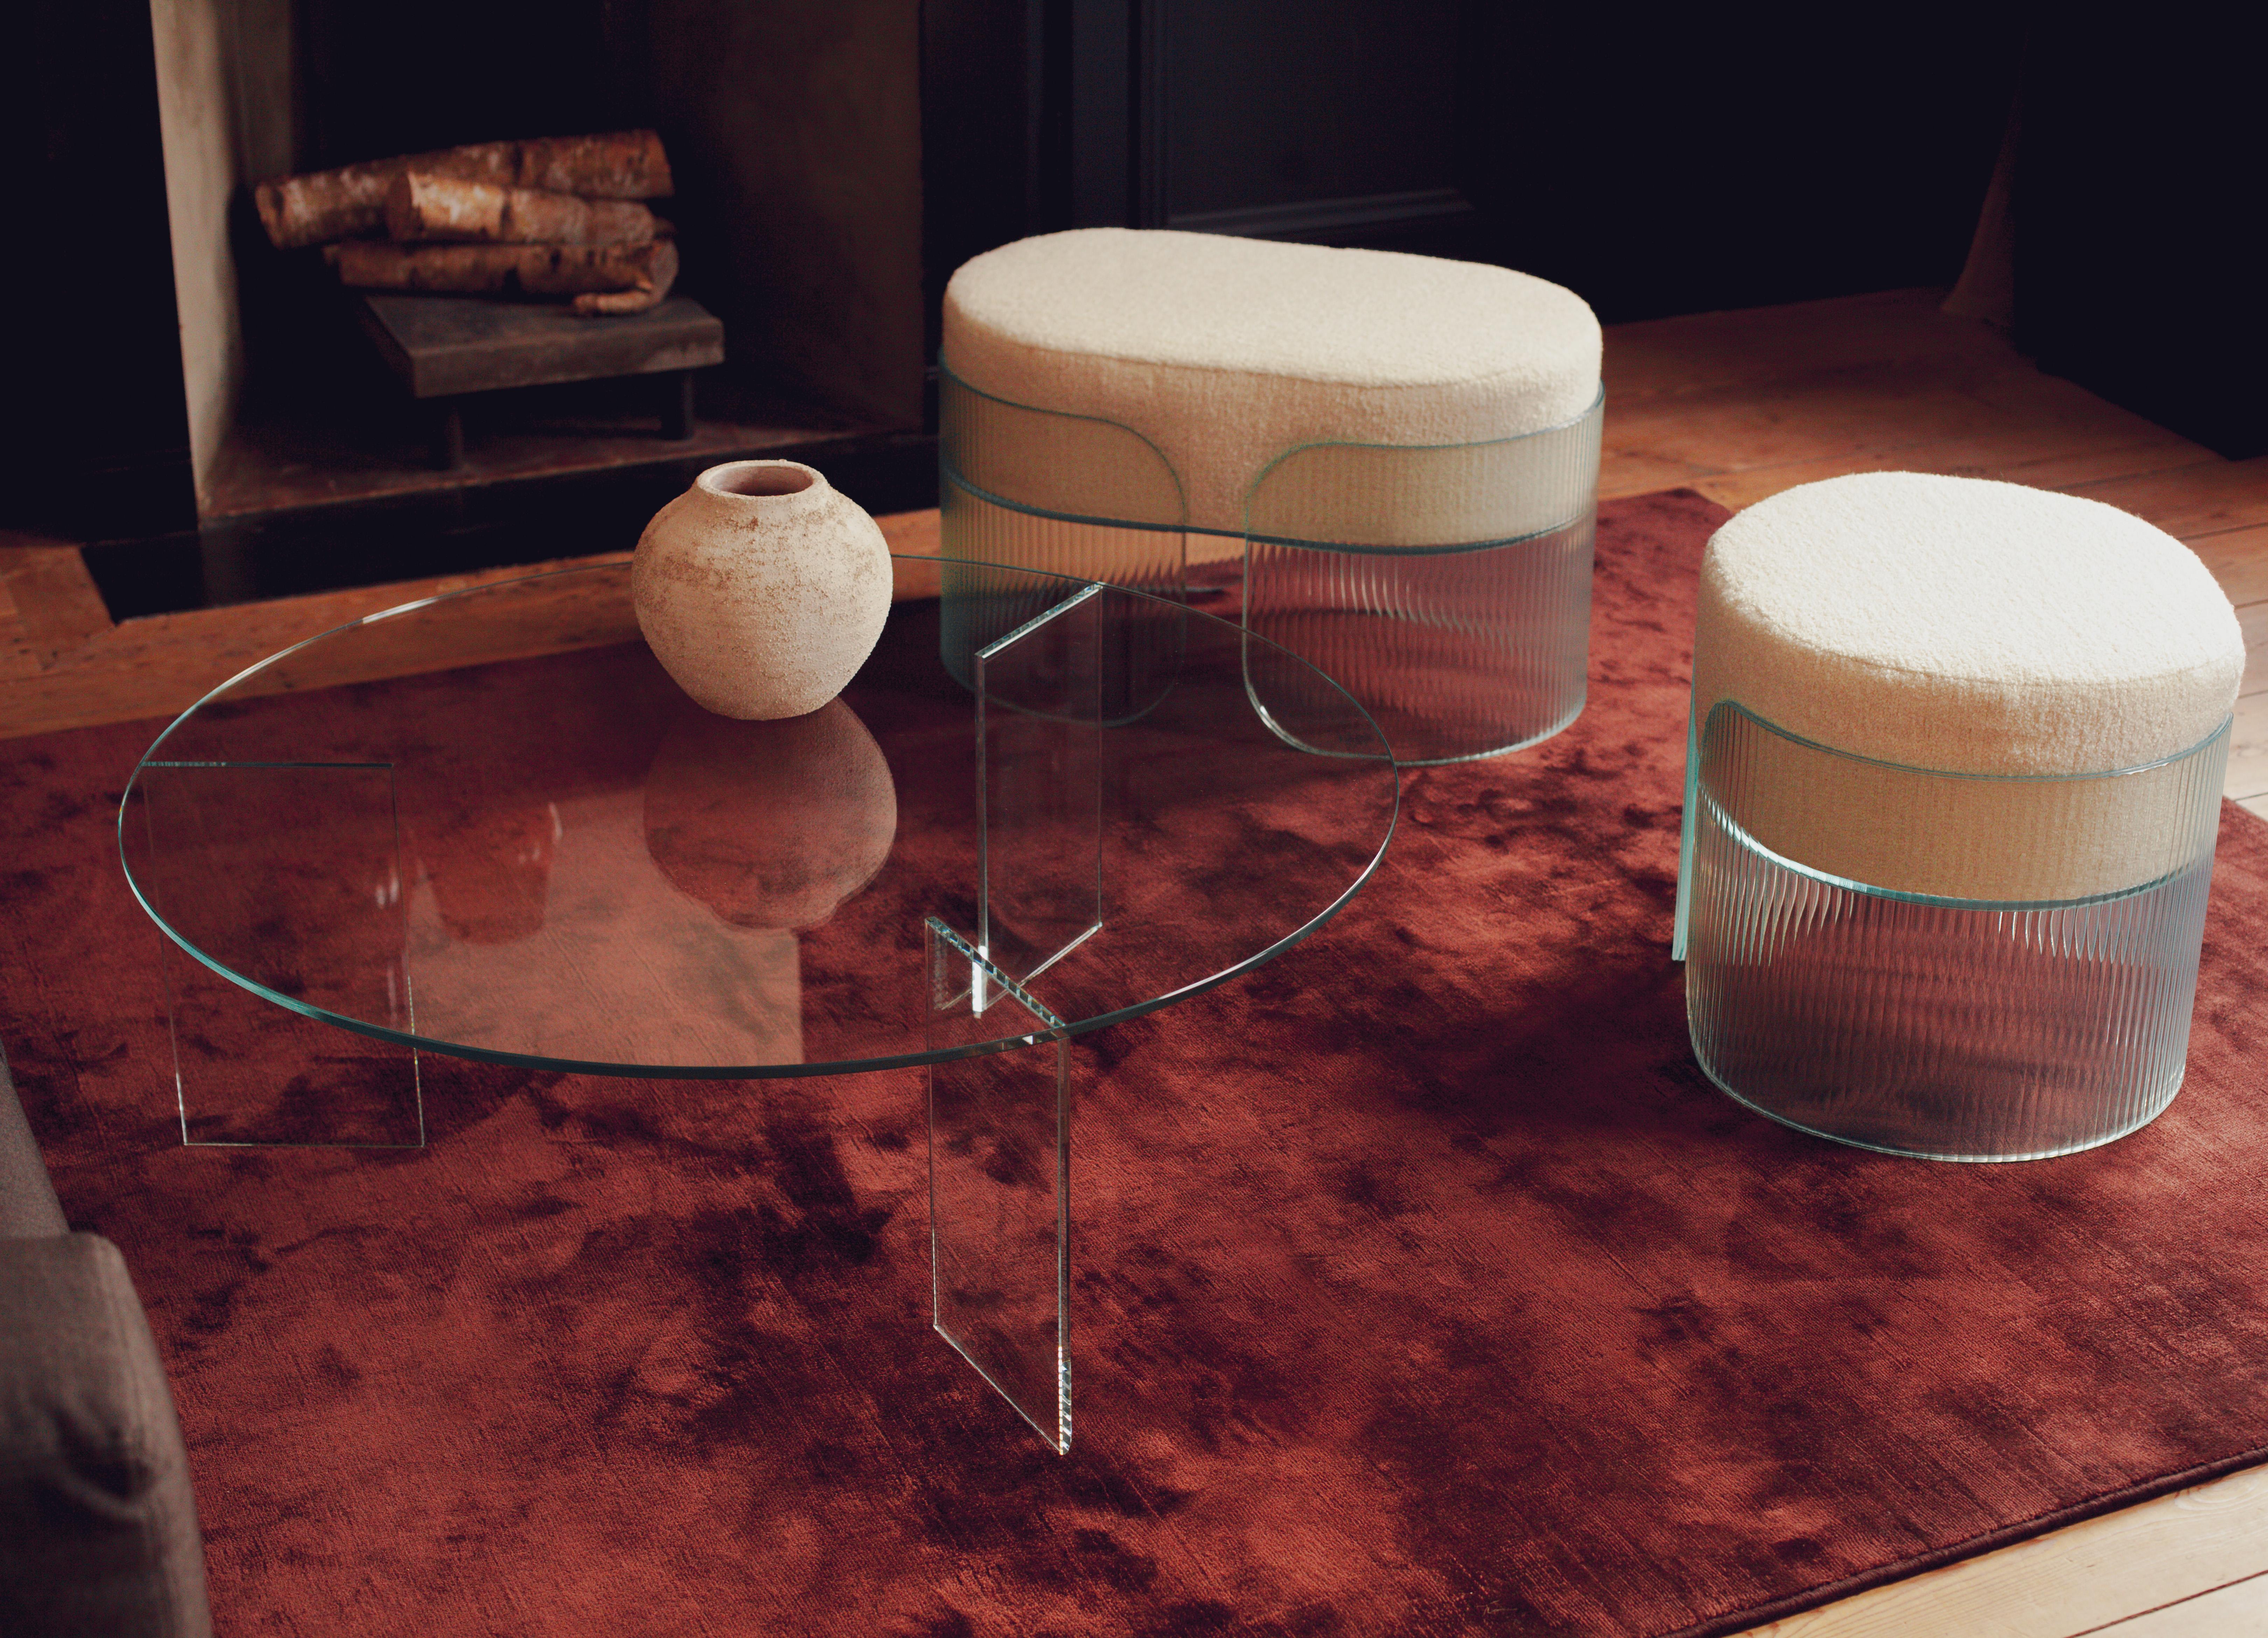 Monolog Low Table XL by Glass Variations
Dimensions: D 130 x H 35 cm
Materials: Glass. 

By designing 100% glass models, the designers of the MONOLOG collection have made a demanding choice which finds its full aesthetic expression with the MONOLOG